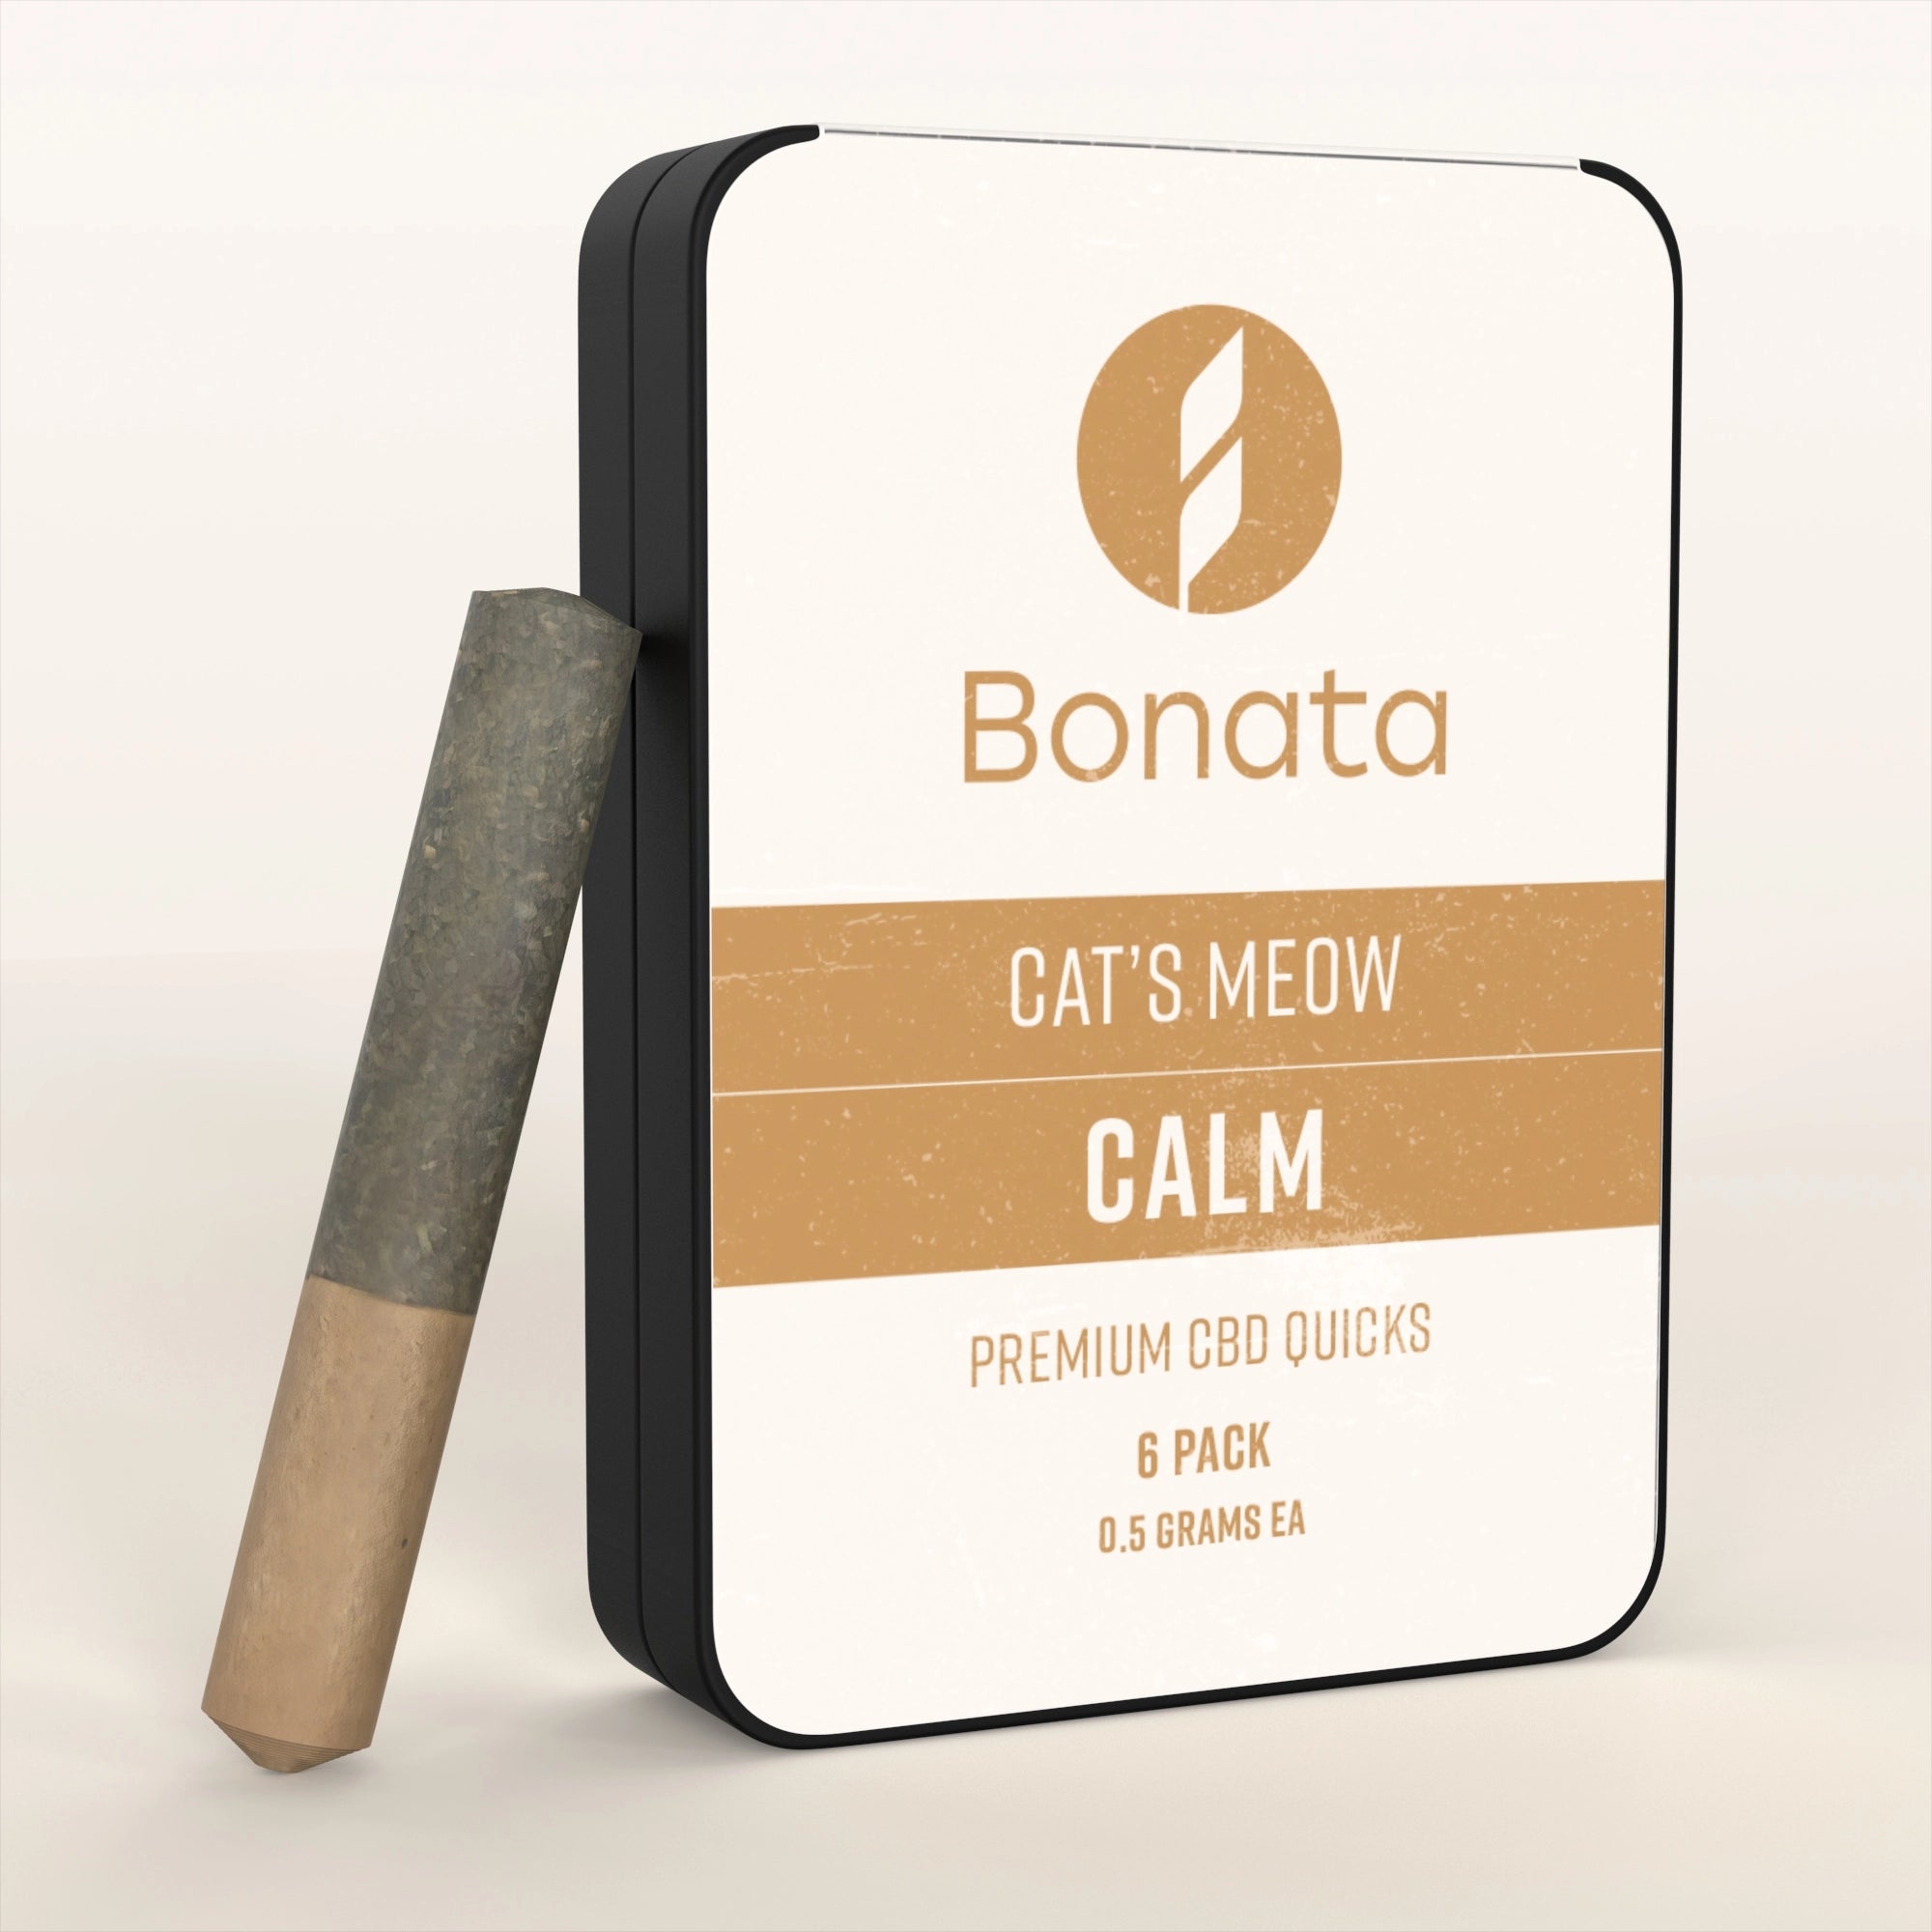 Cat's Meow CBD Cigarettes with hand trimmed indoor grown CBD flower and contains no tobacco or nicotine just CBD flower